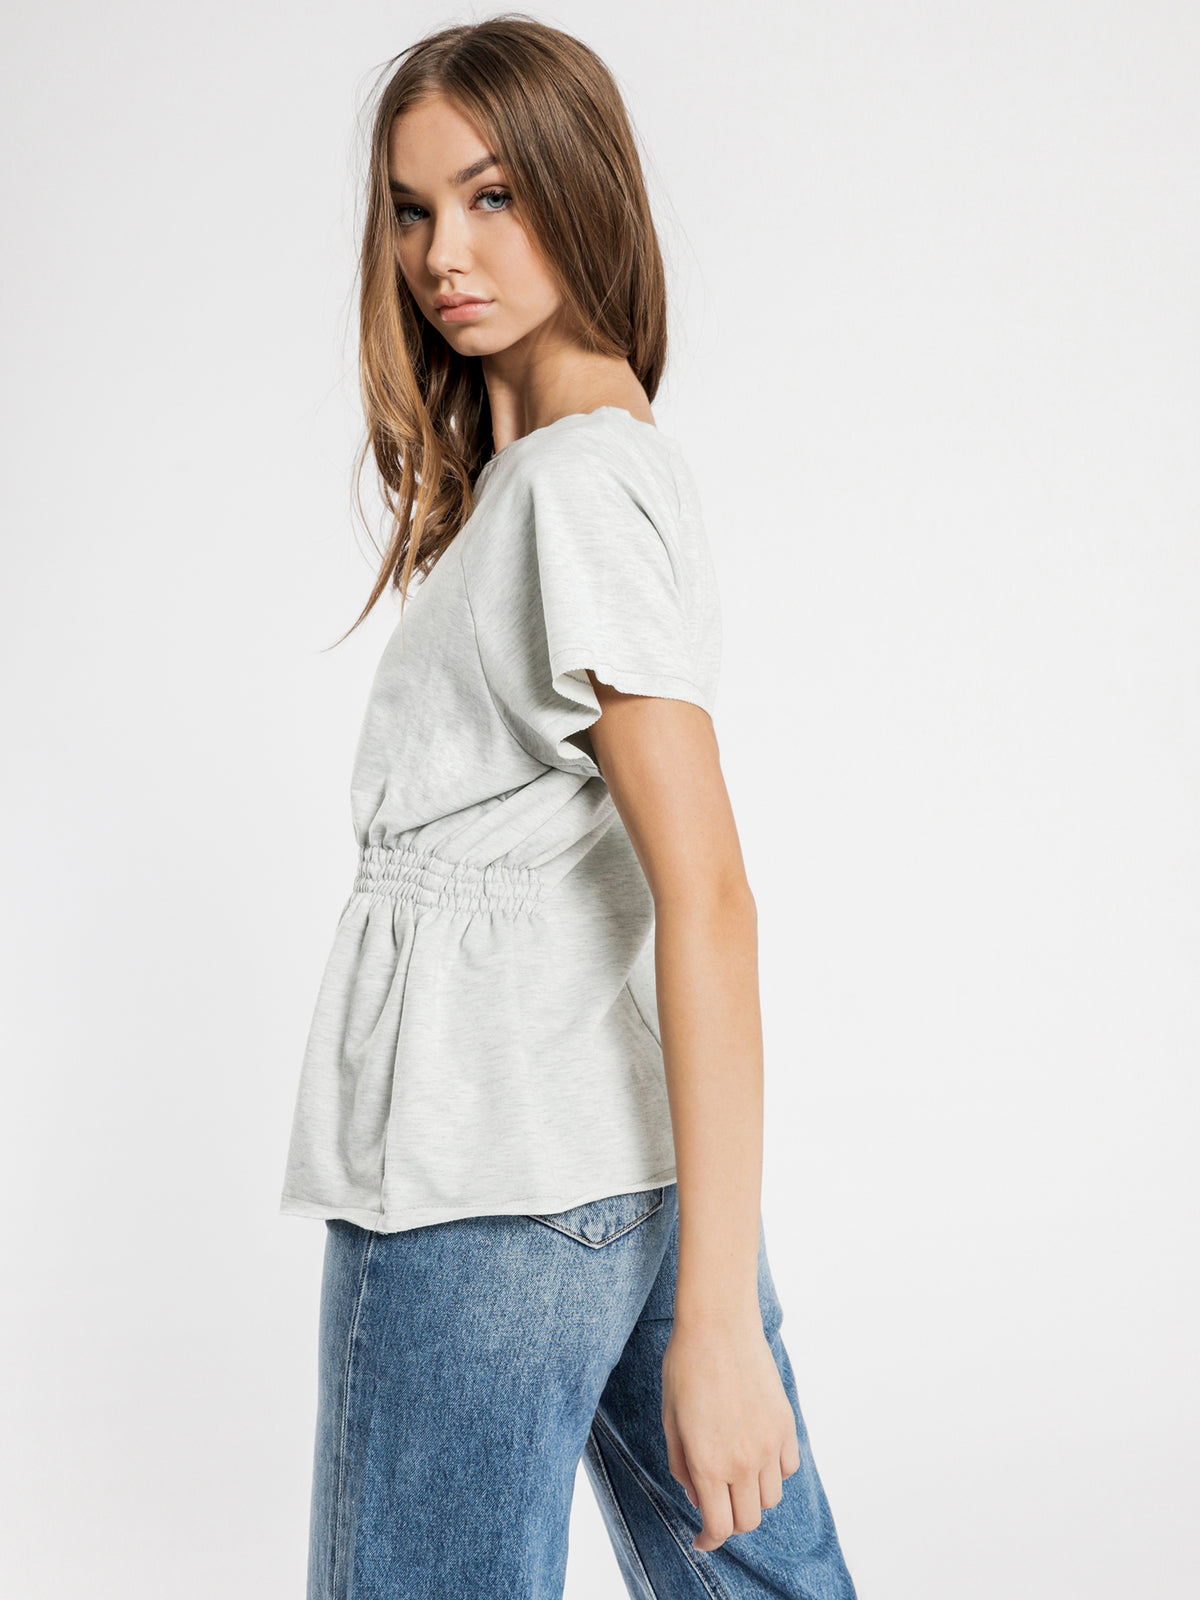 Wasted T-Shirt in Grey Marle